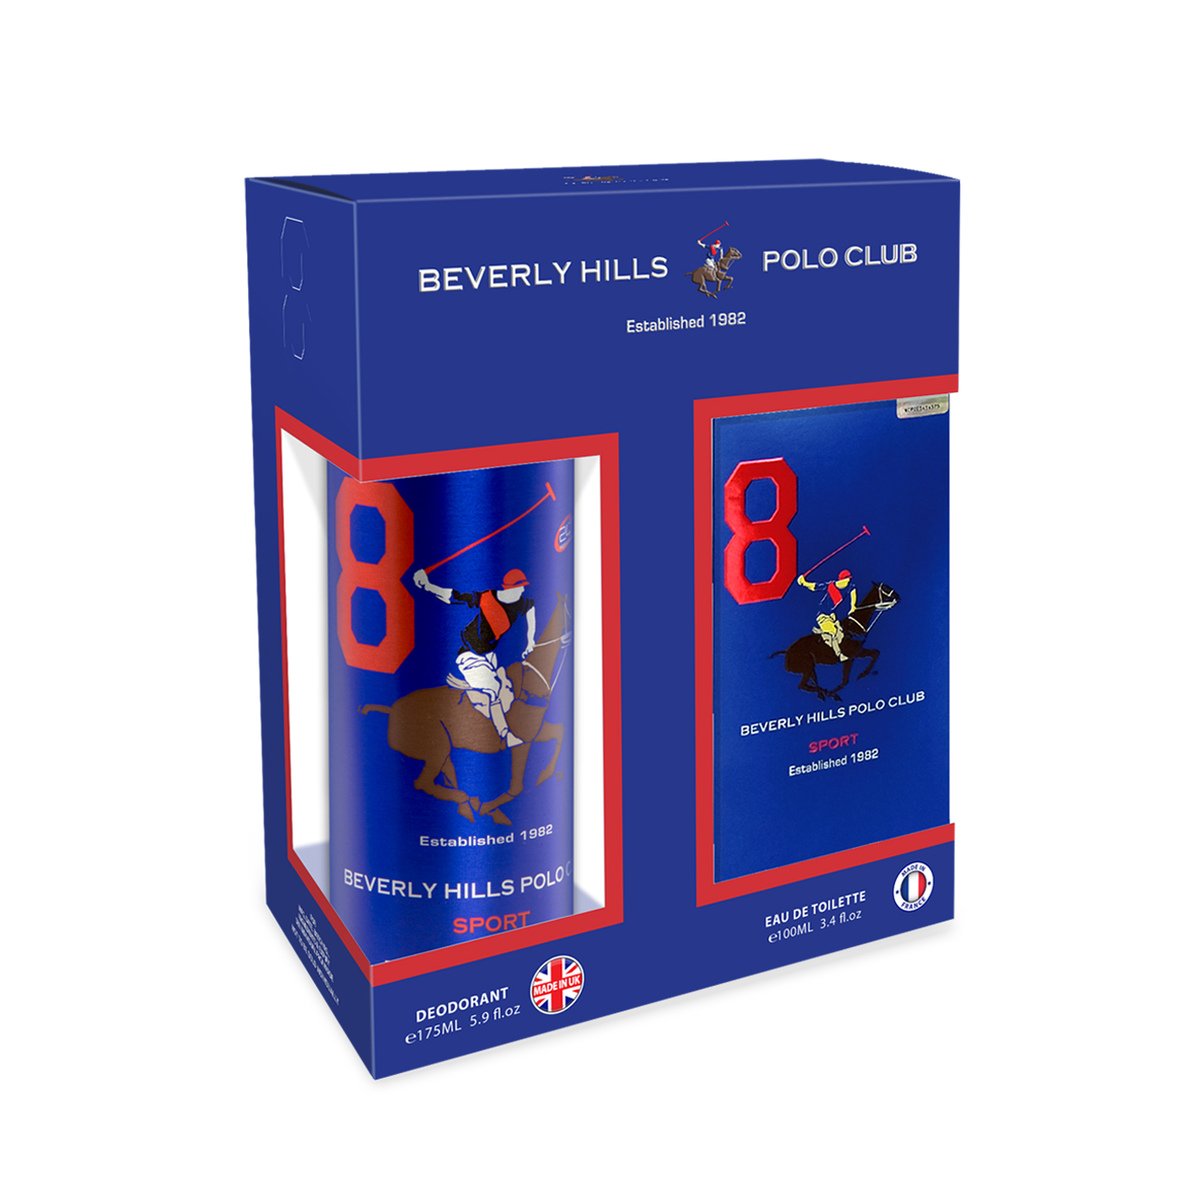 Beverly Hills Polo Club Sport 8 EDT for Men 100 ml + Beverly Hills Polo Club Sport 8 Deodorant 175 ml